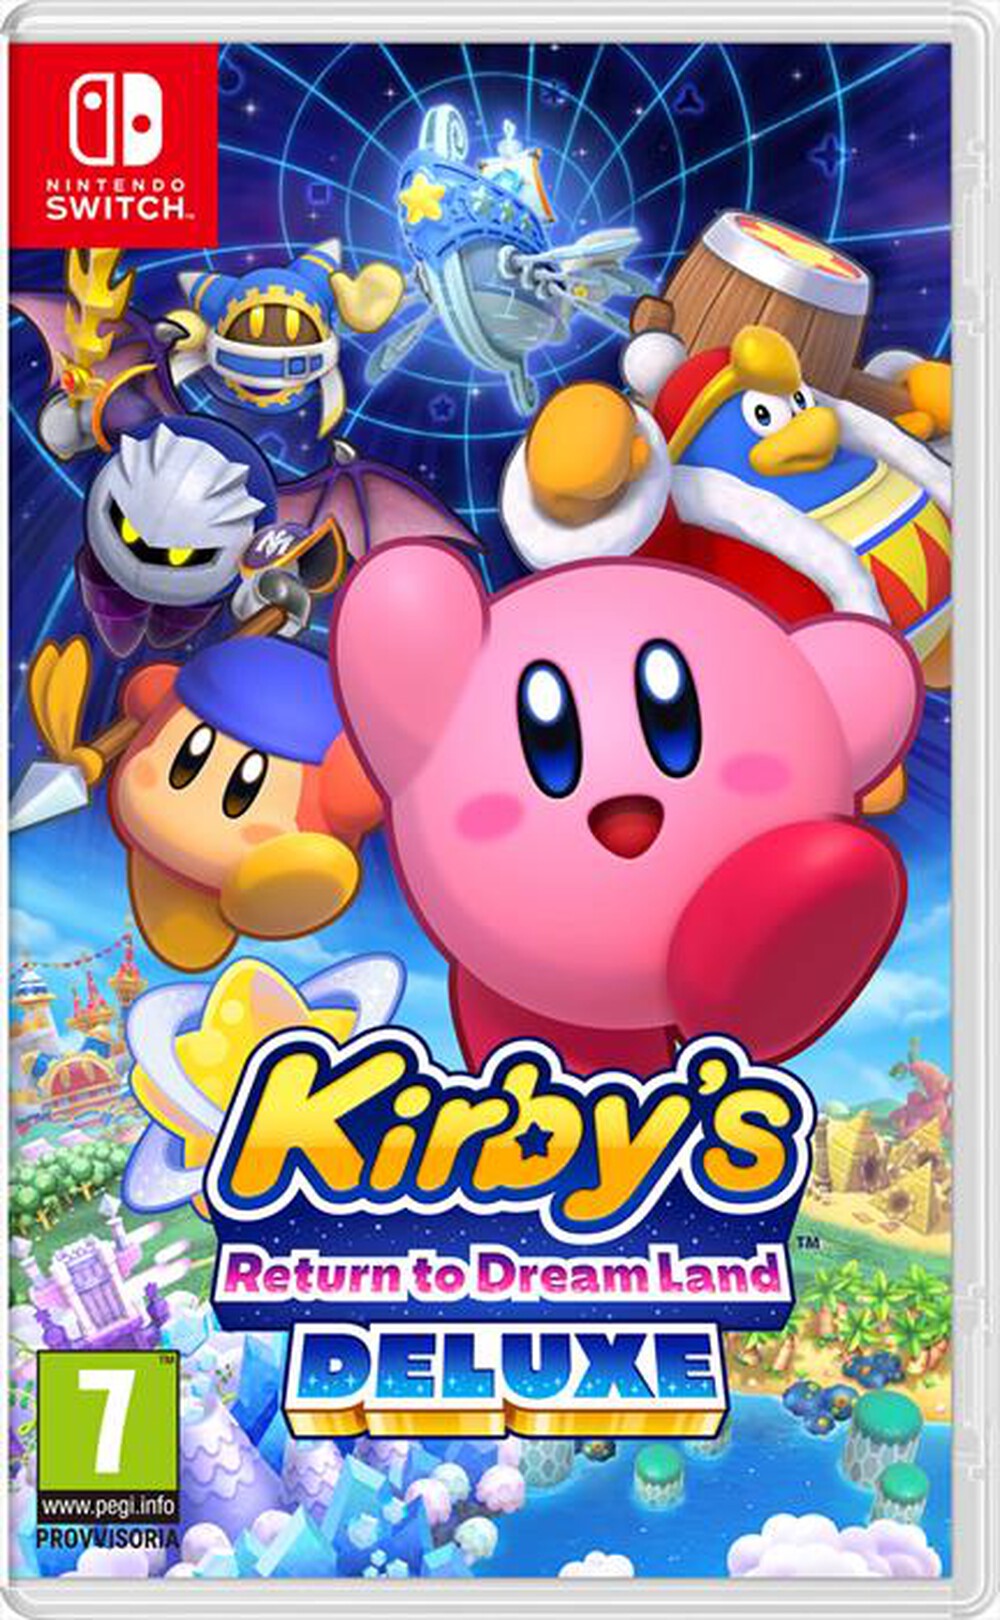 "NINTENDO - Kirby’s Return to Dream Land Deluxe SWITCH"